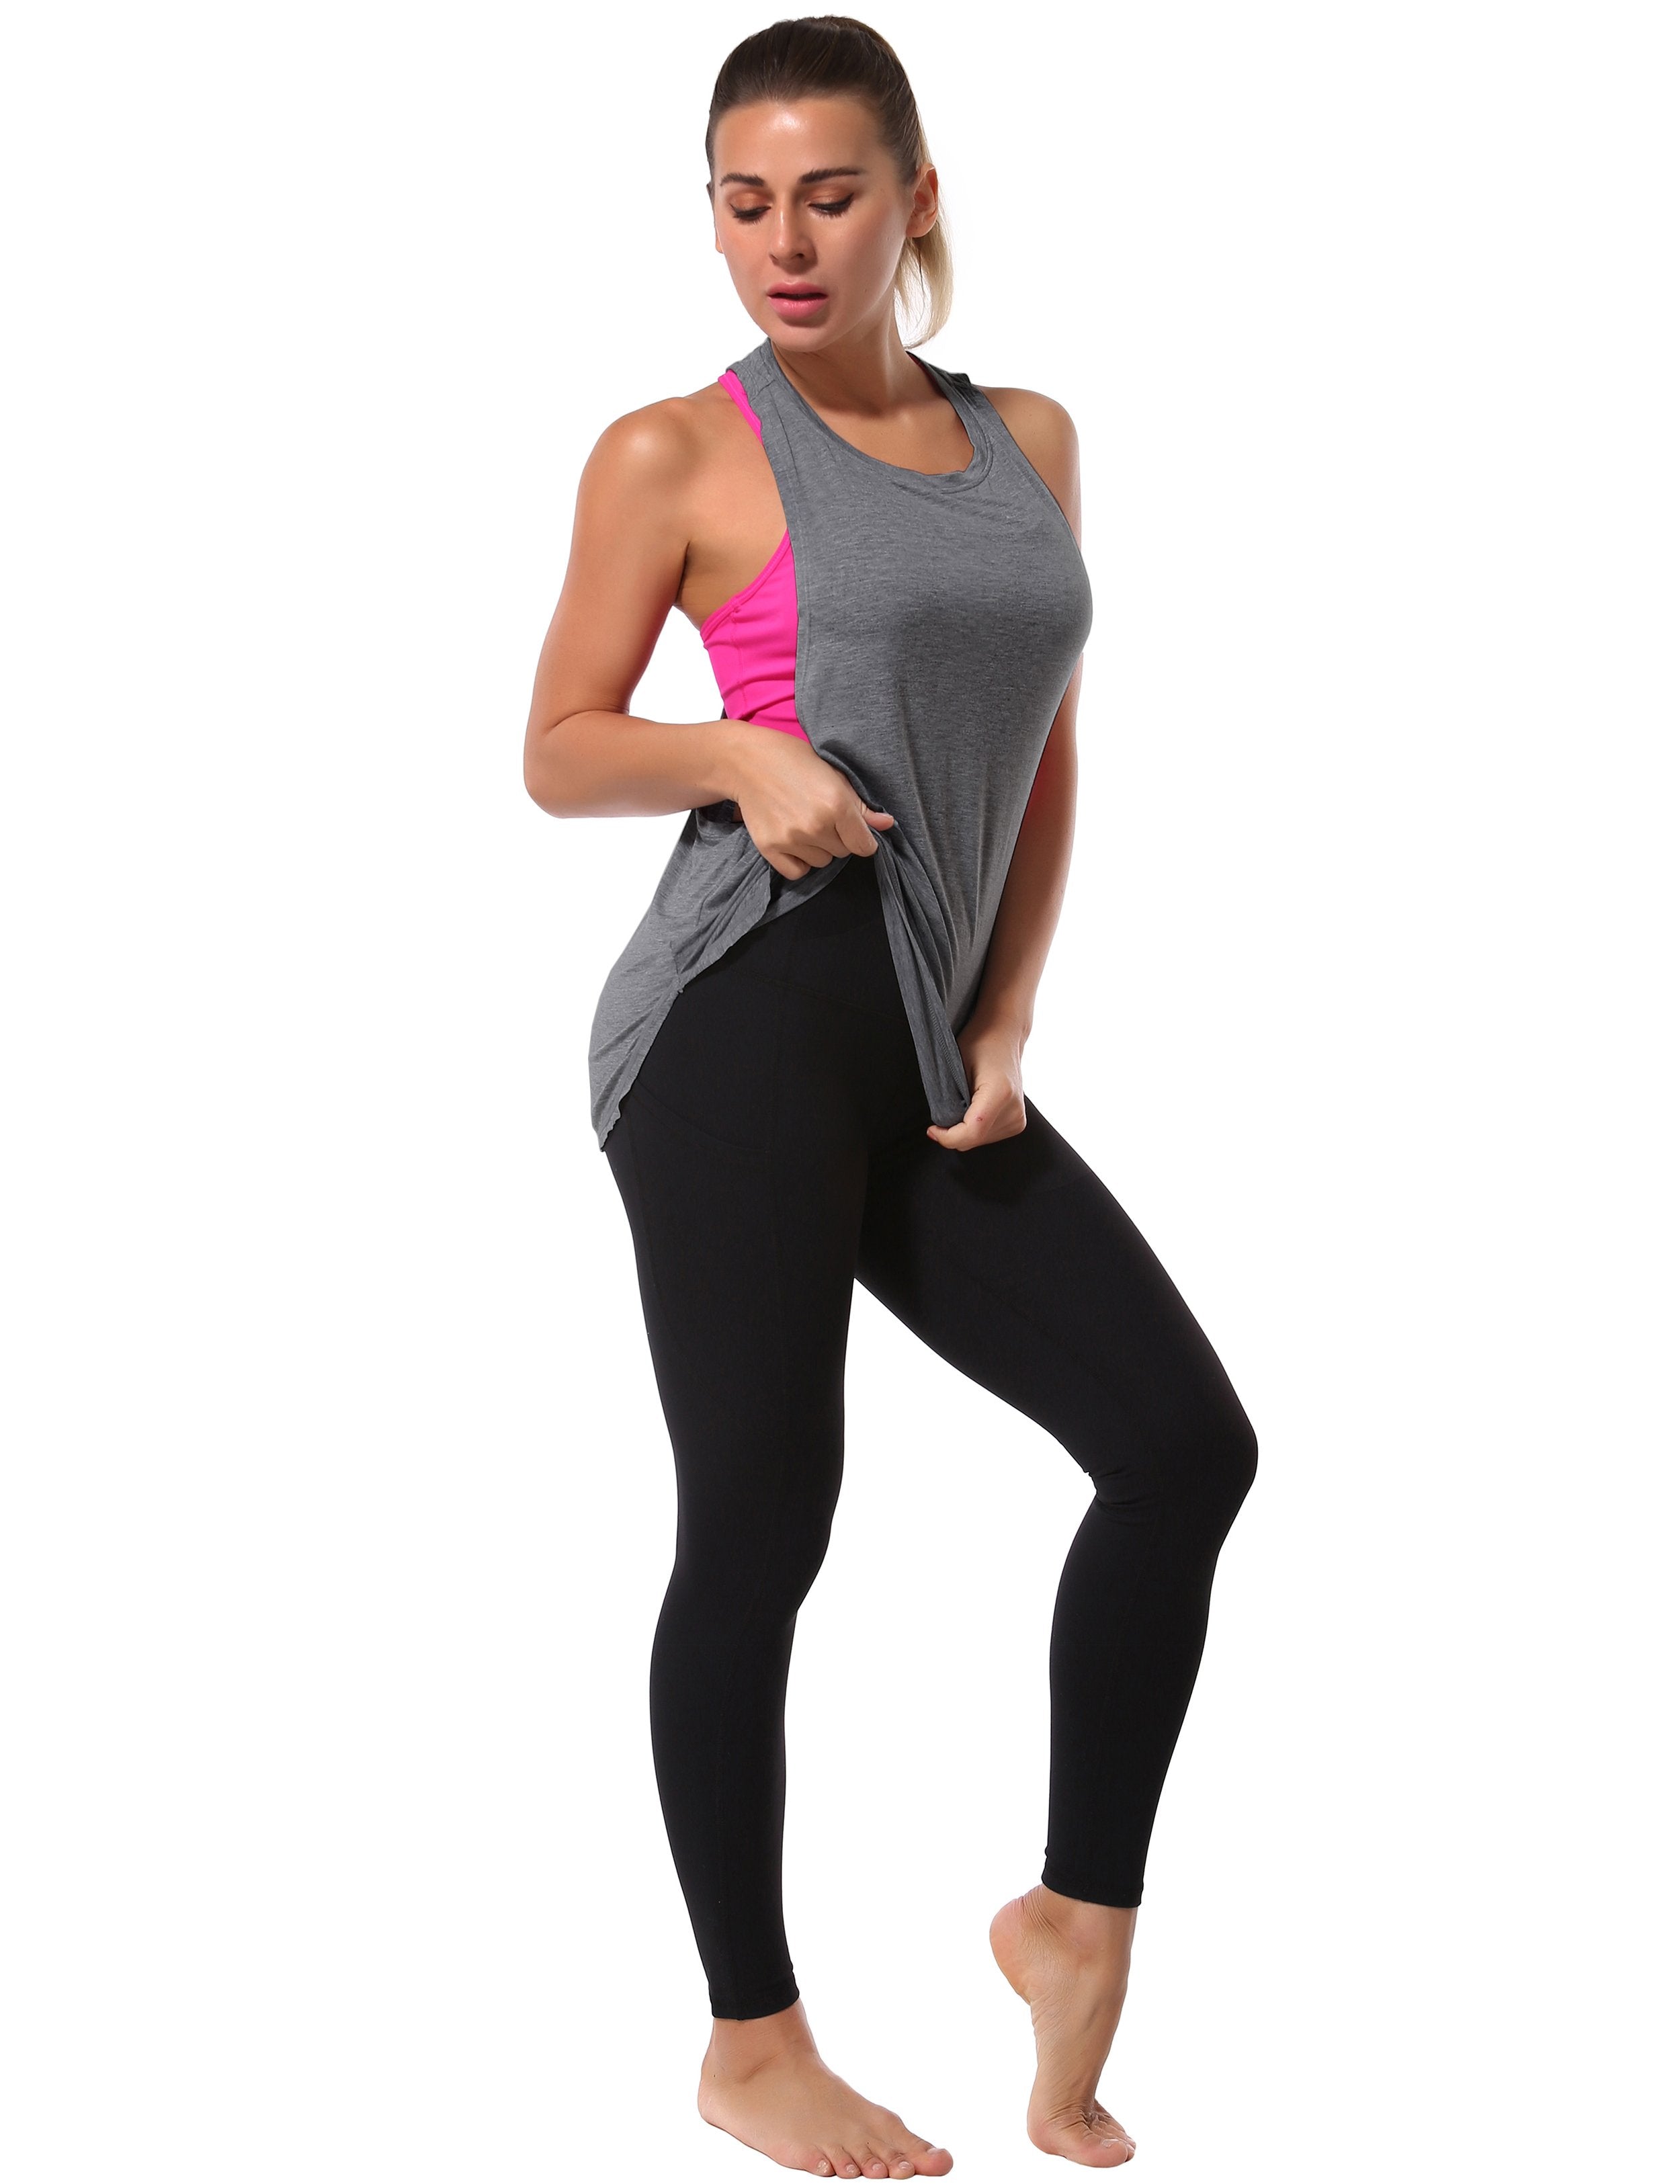 Low Cut Loose Fit Tank Top heathercharcoal Designed for On the Move Loose fit 93%Modal/7%Spandex Four-way stretch Naturally breathable Super-Soft, Modal Fabric